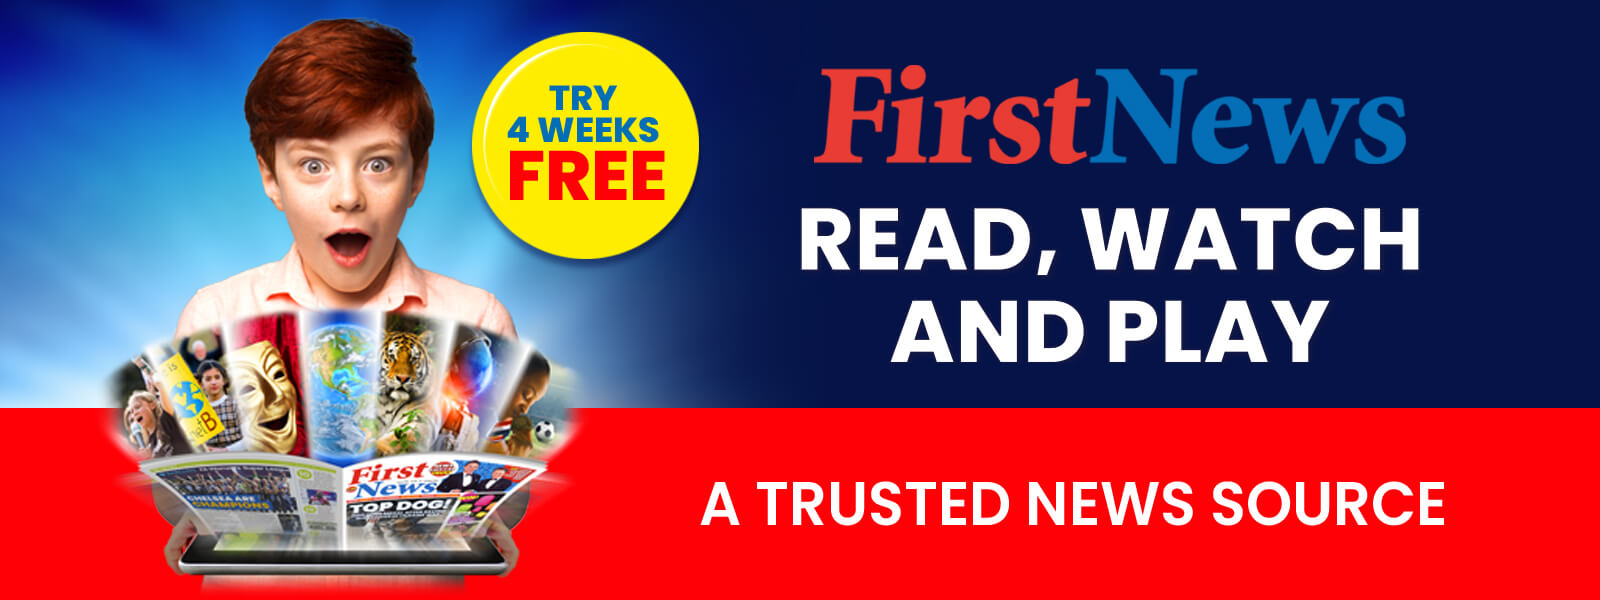 First News - A trusted news source. Read, Watch and Play! Try 4 weeks FREE